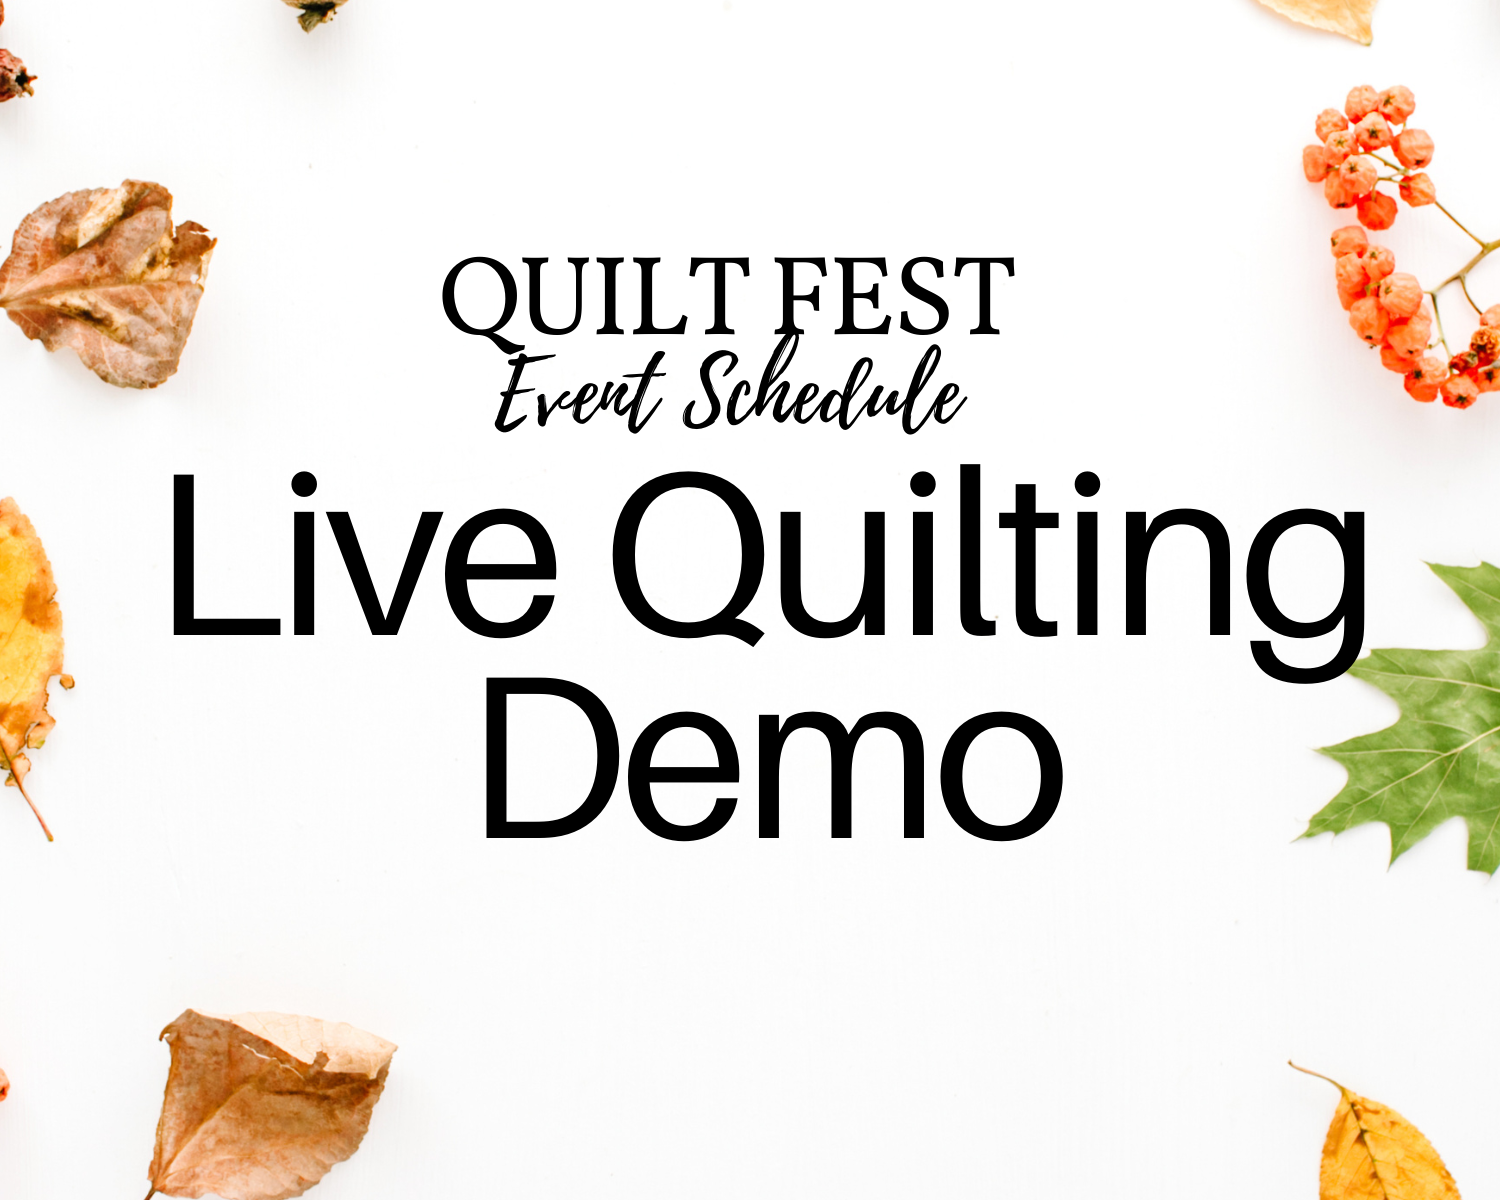 live machine quilting demo from start to finish